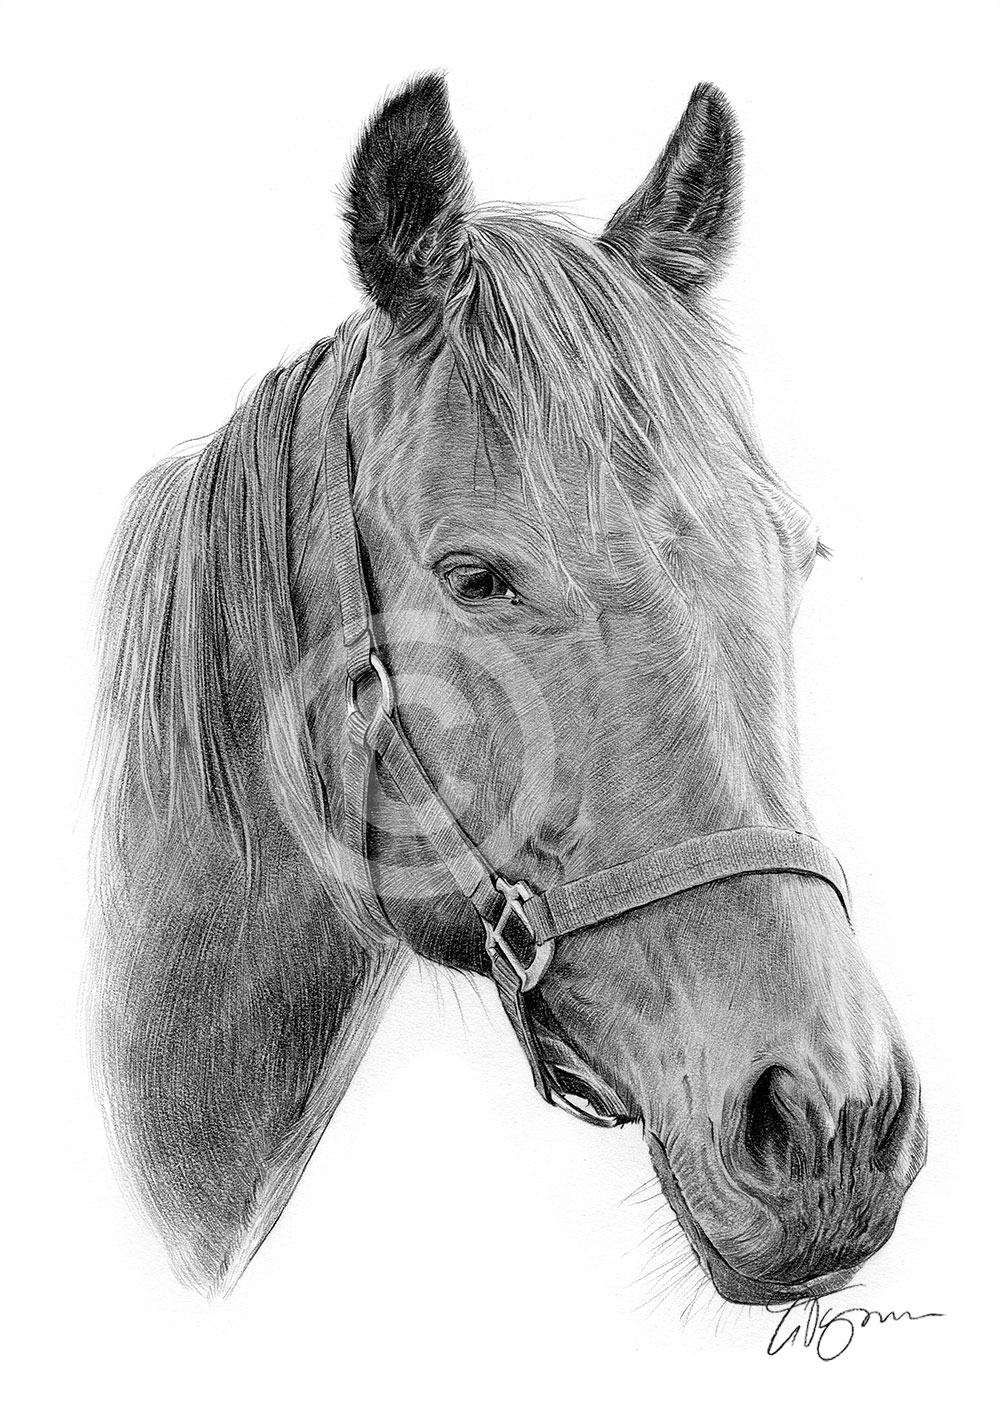 Pencil drawing of an adult horse by artist Gary Tymon